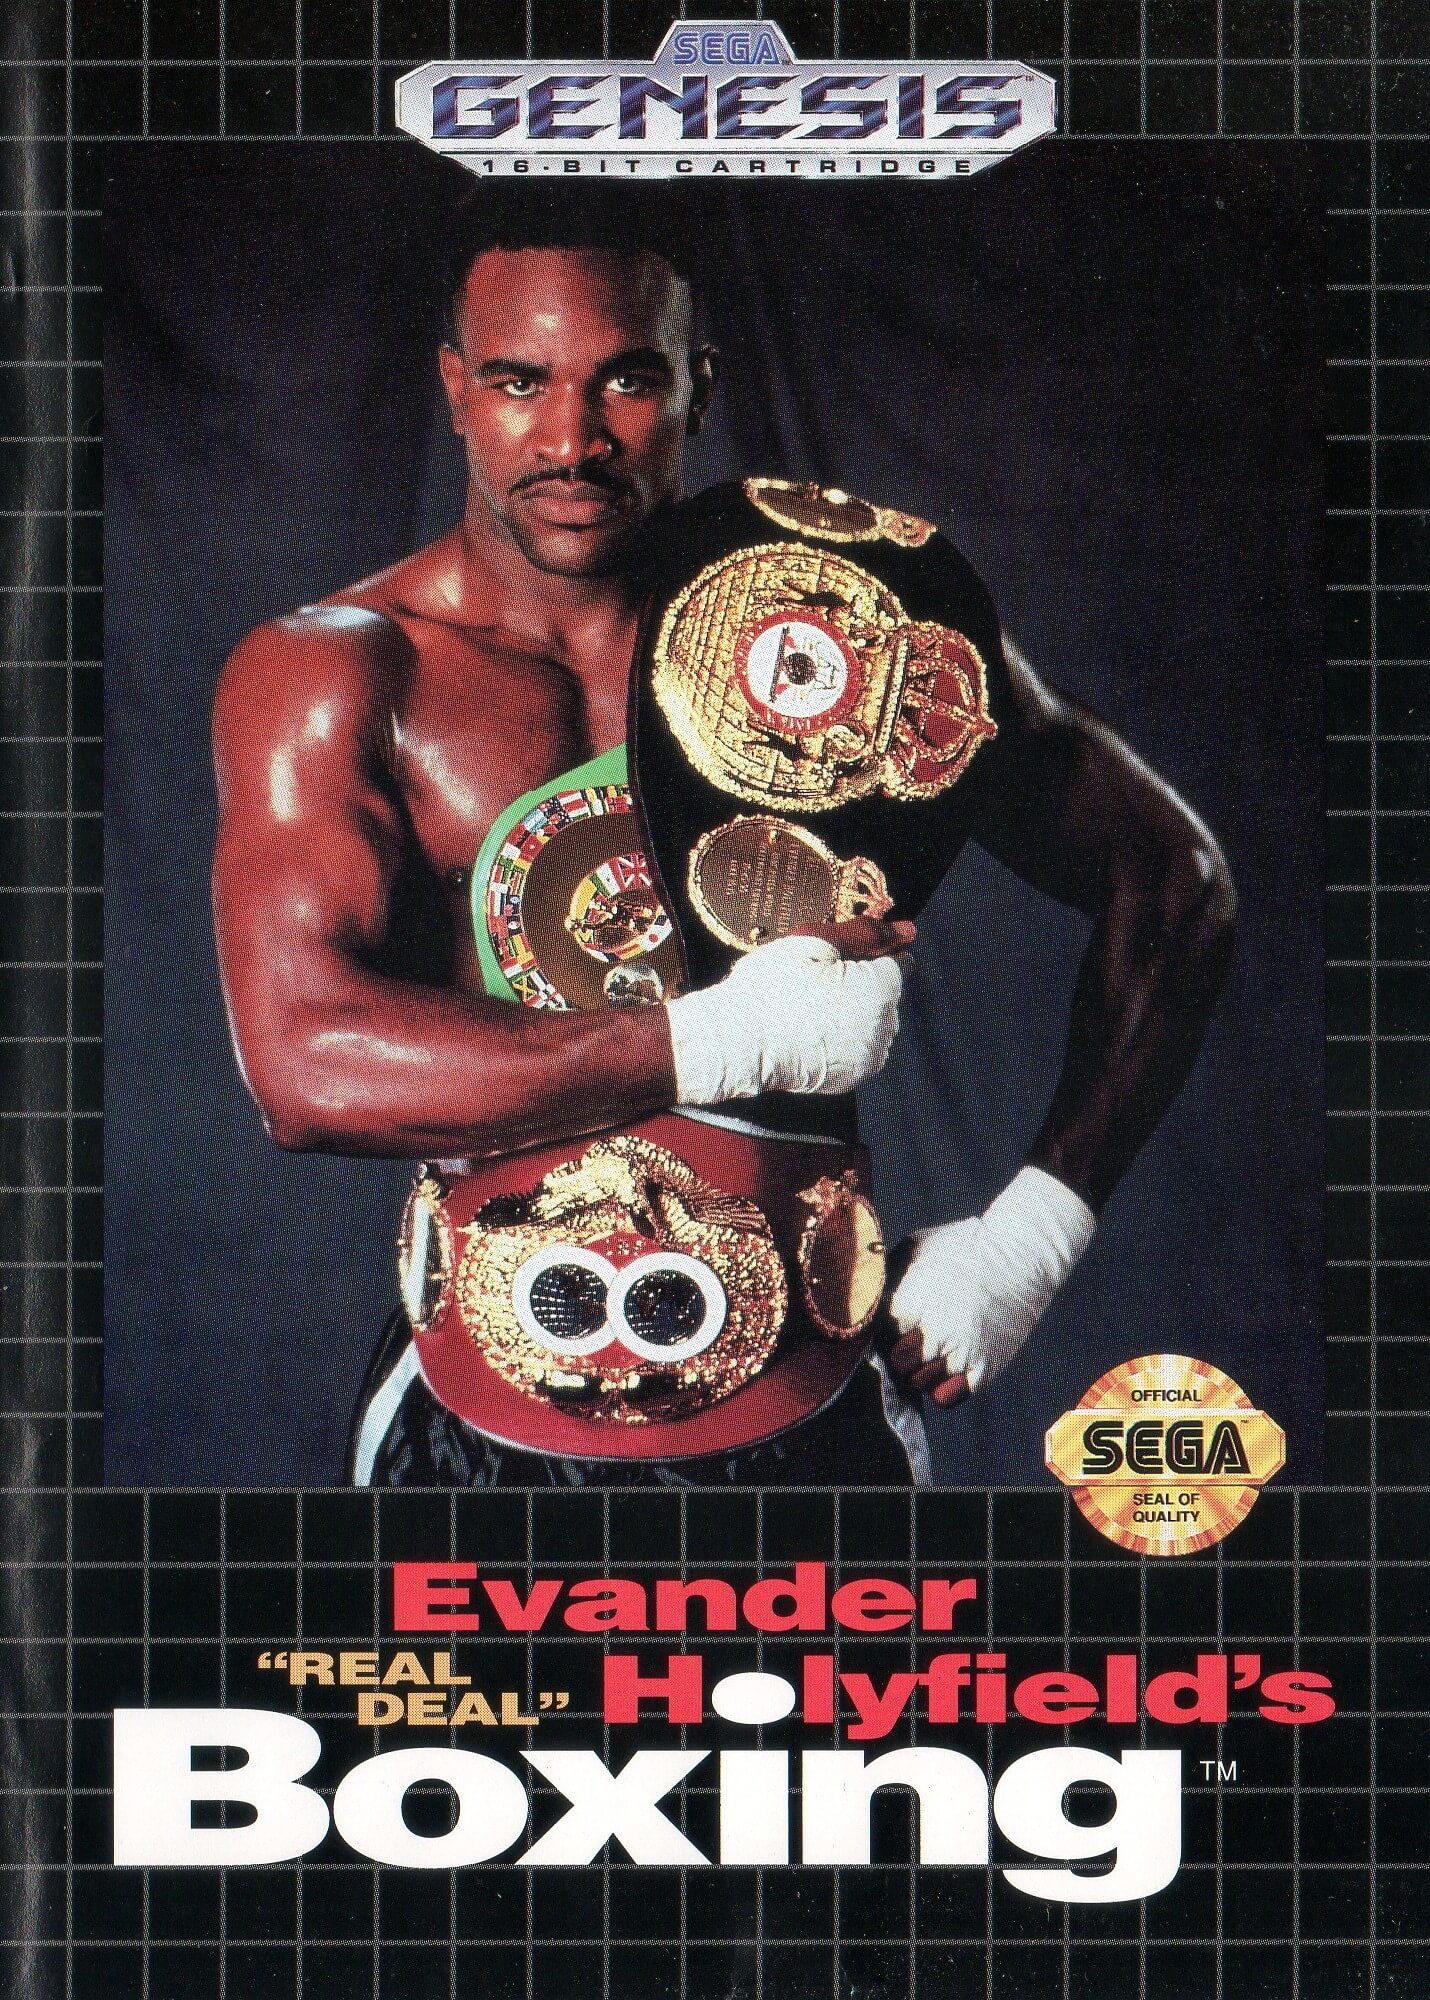 Evander Holyfield's "Real Deal" Boxing